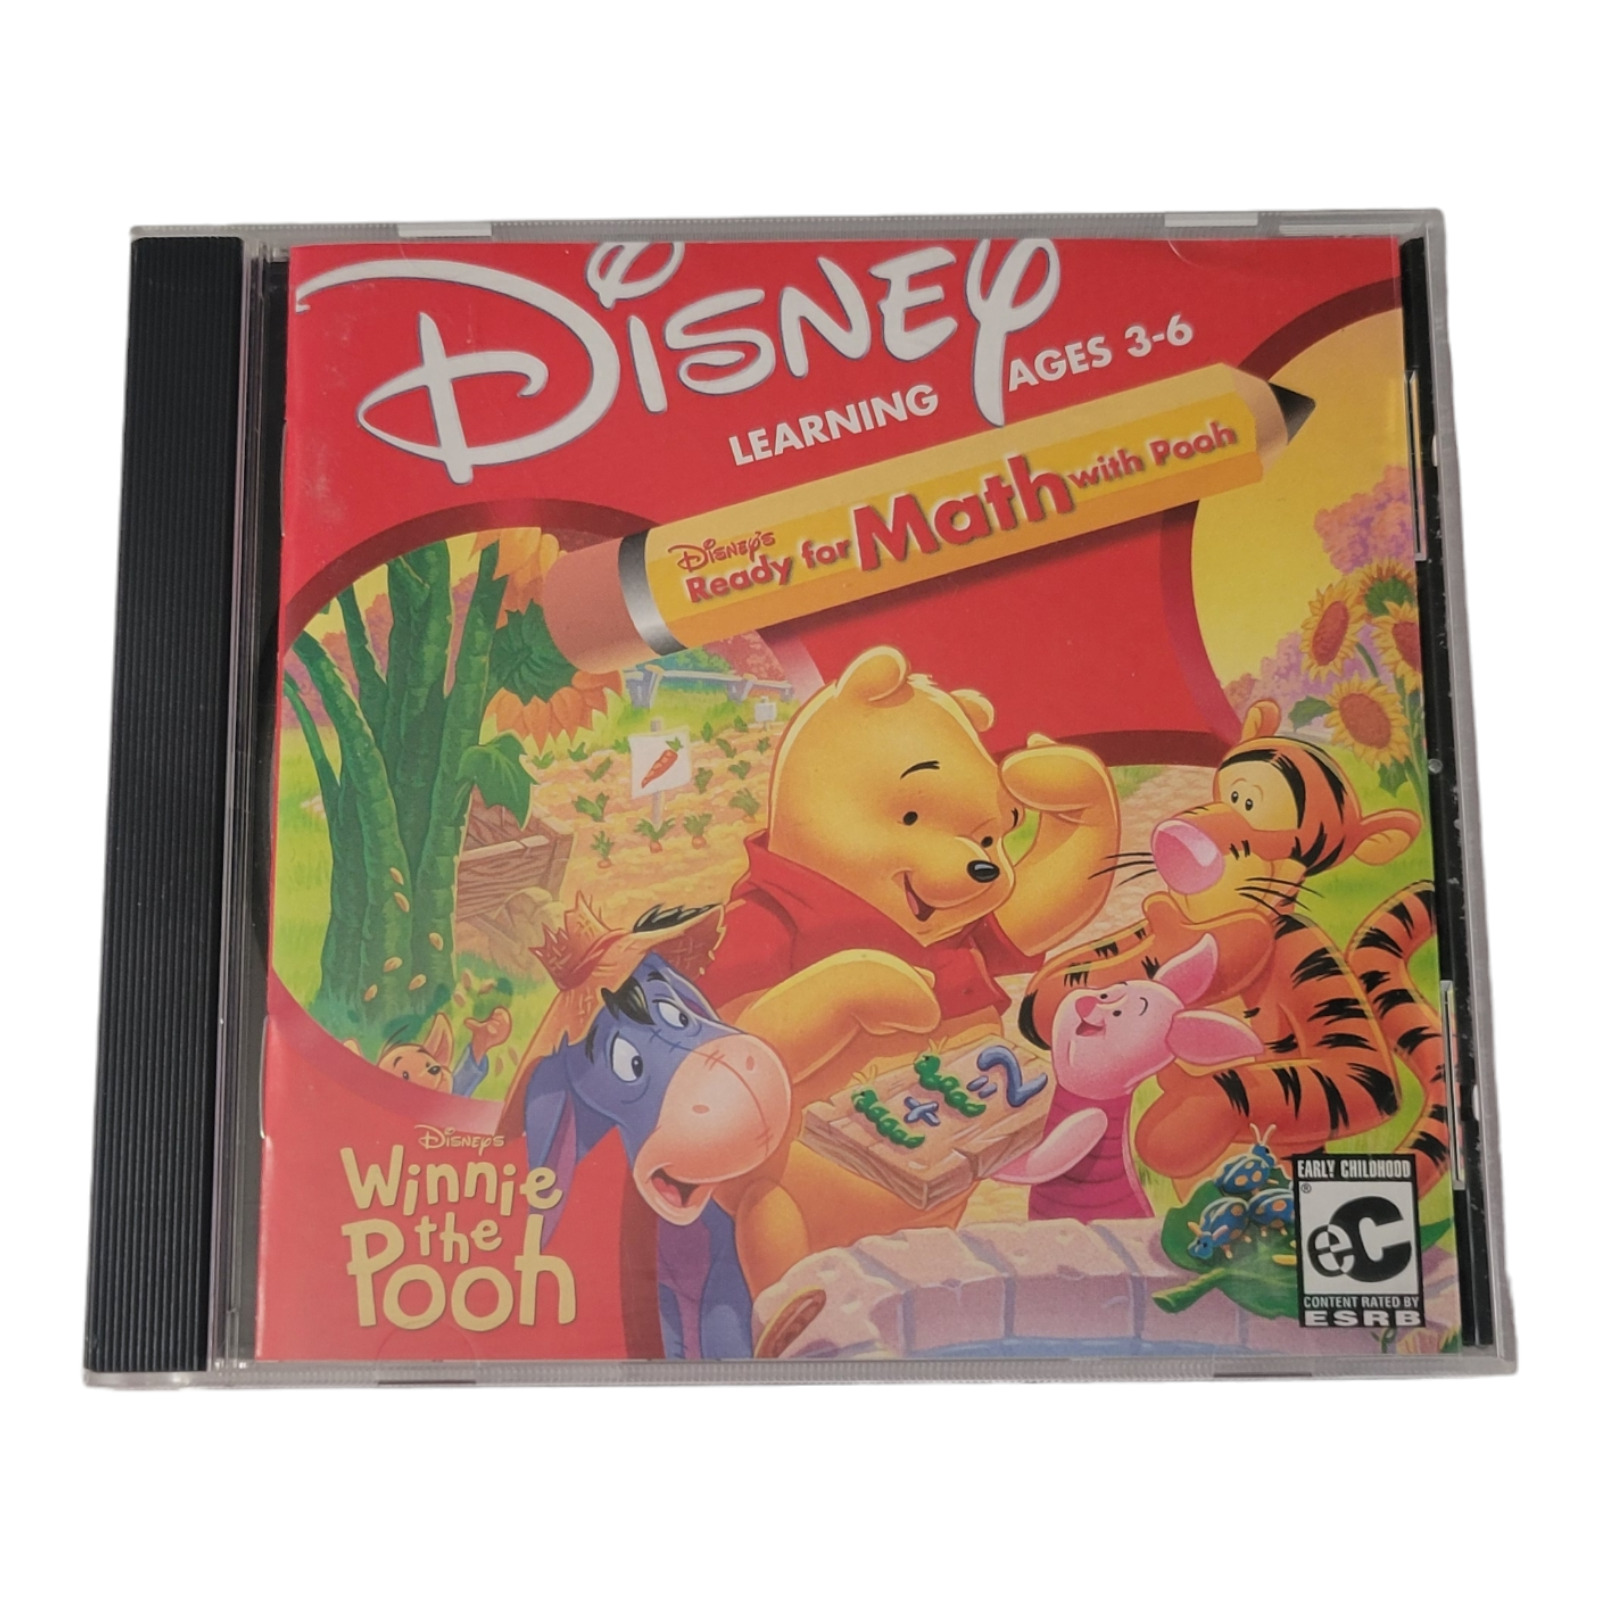 Disney Winnie the Pooh Learning Ready For Math Computer Game Windows 95/98